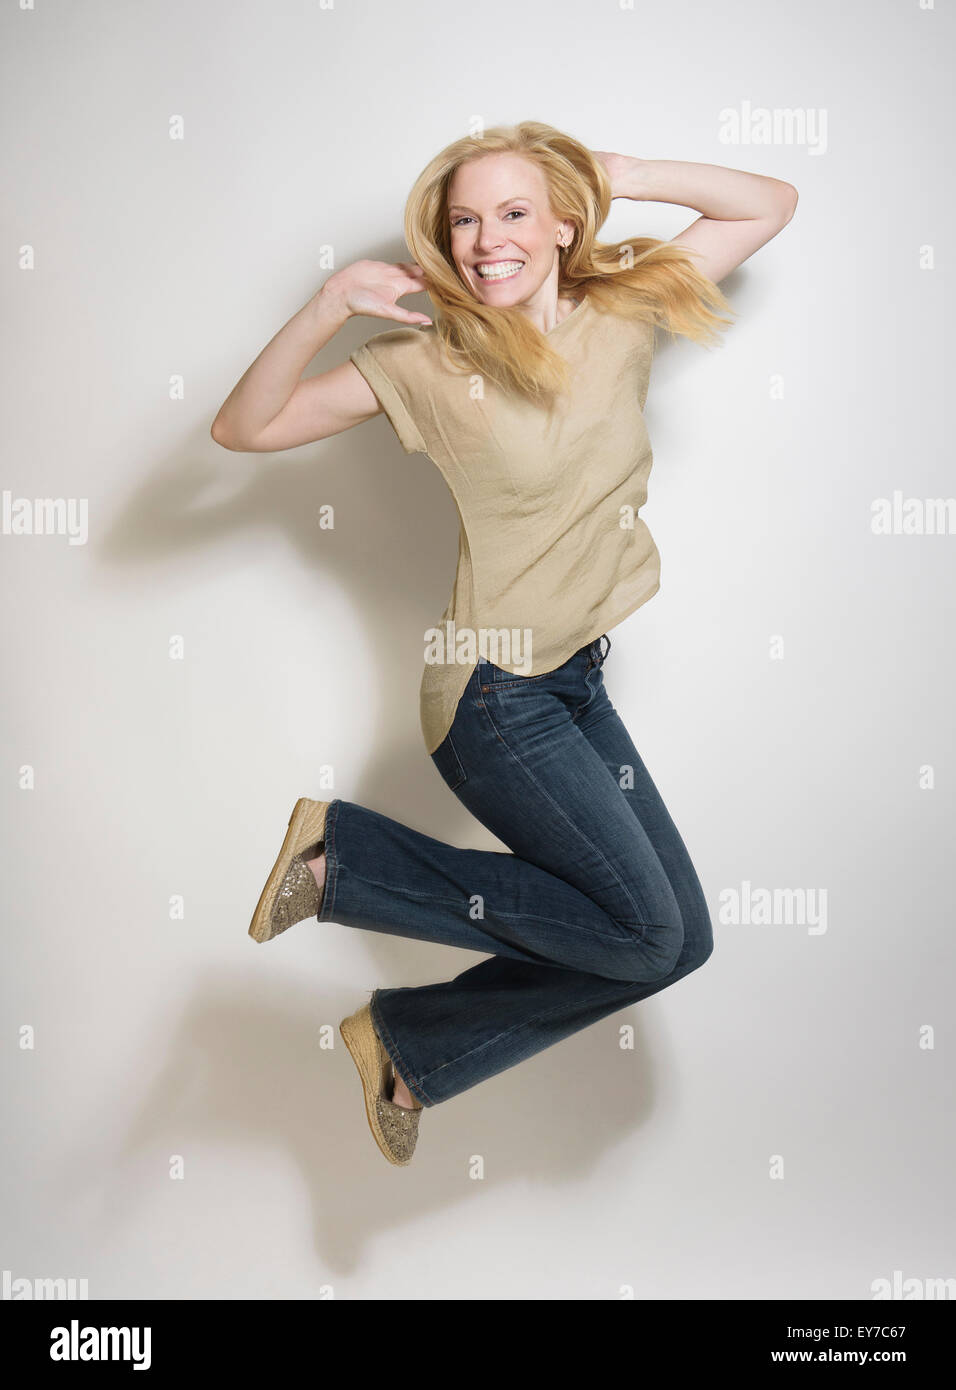 Portrait of mid-adult woman jumping Banque D'Images